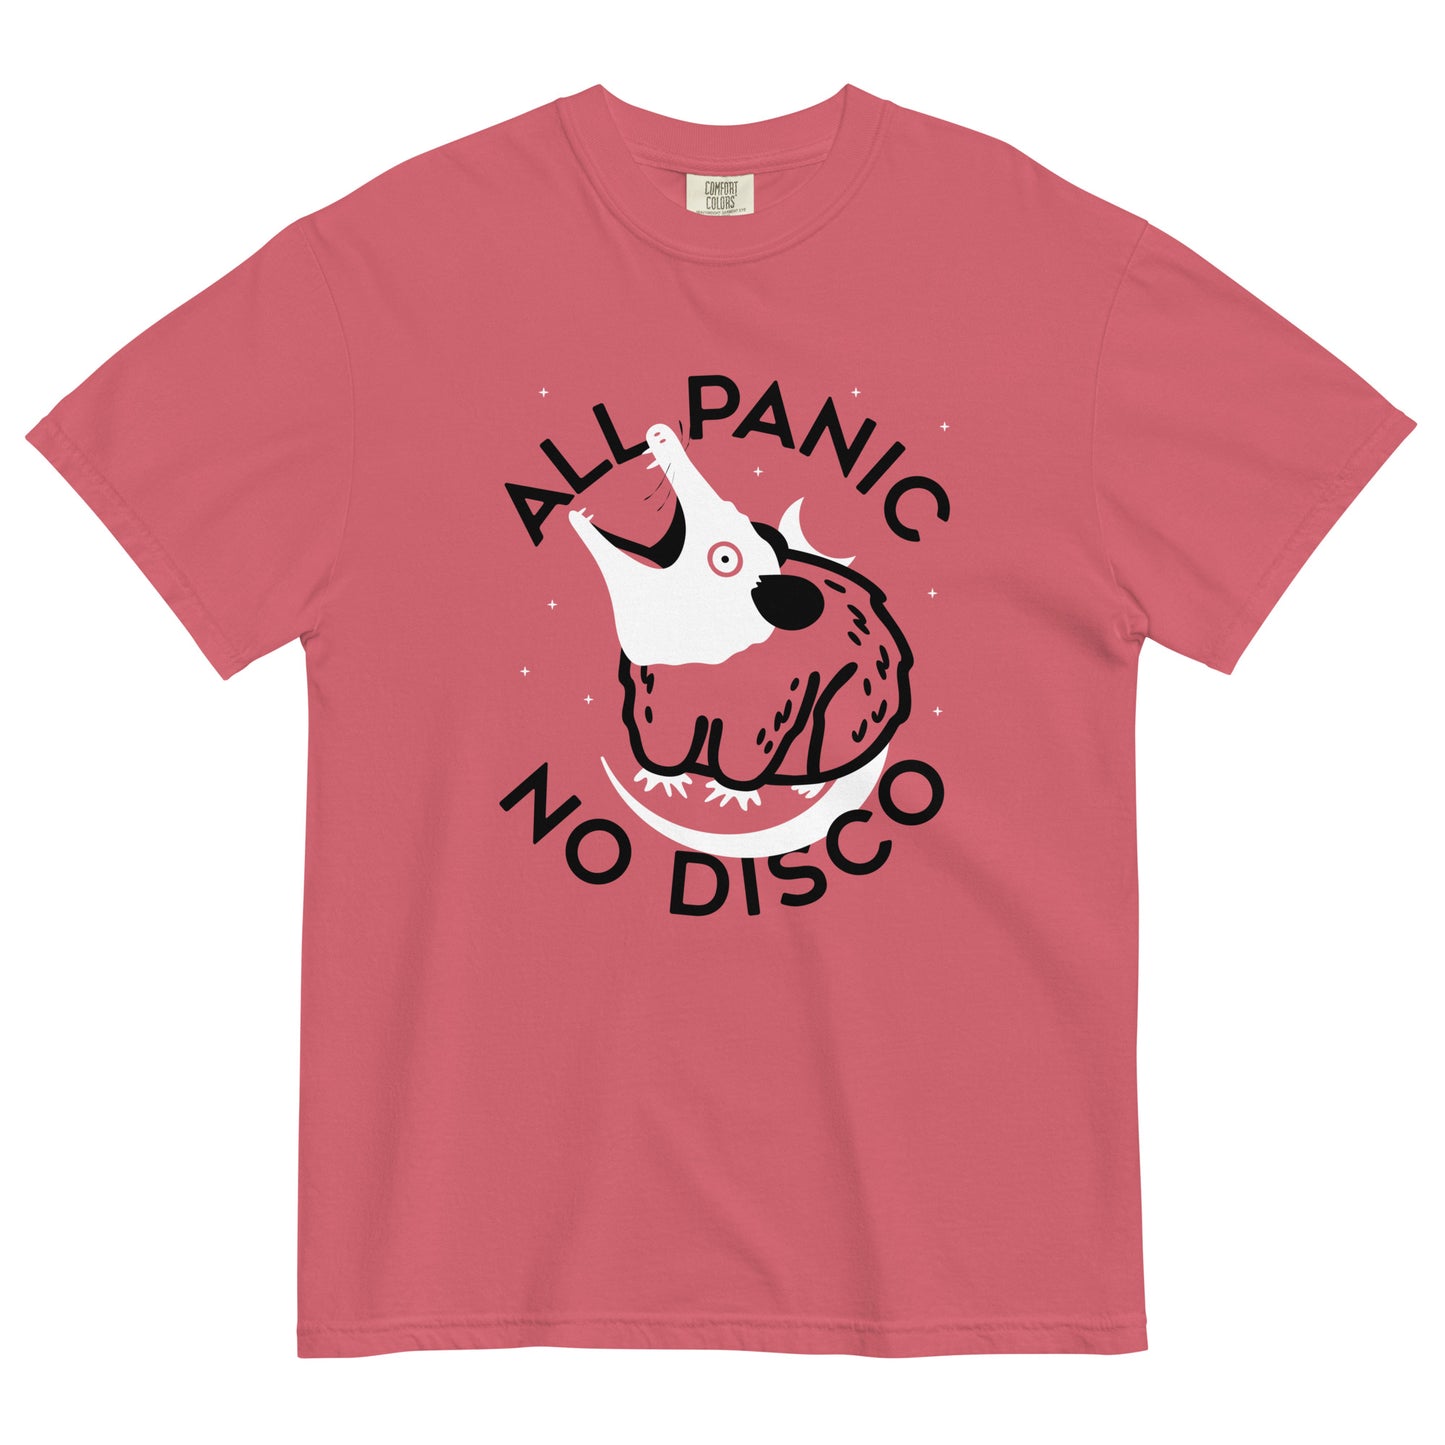 All Panic No Disco Men's Relaxed Fit Tee